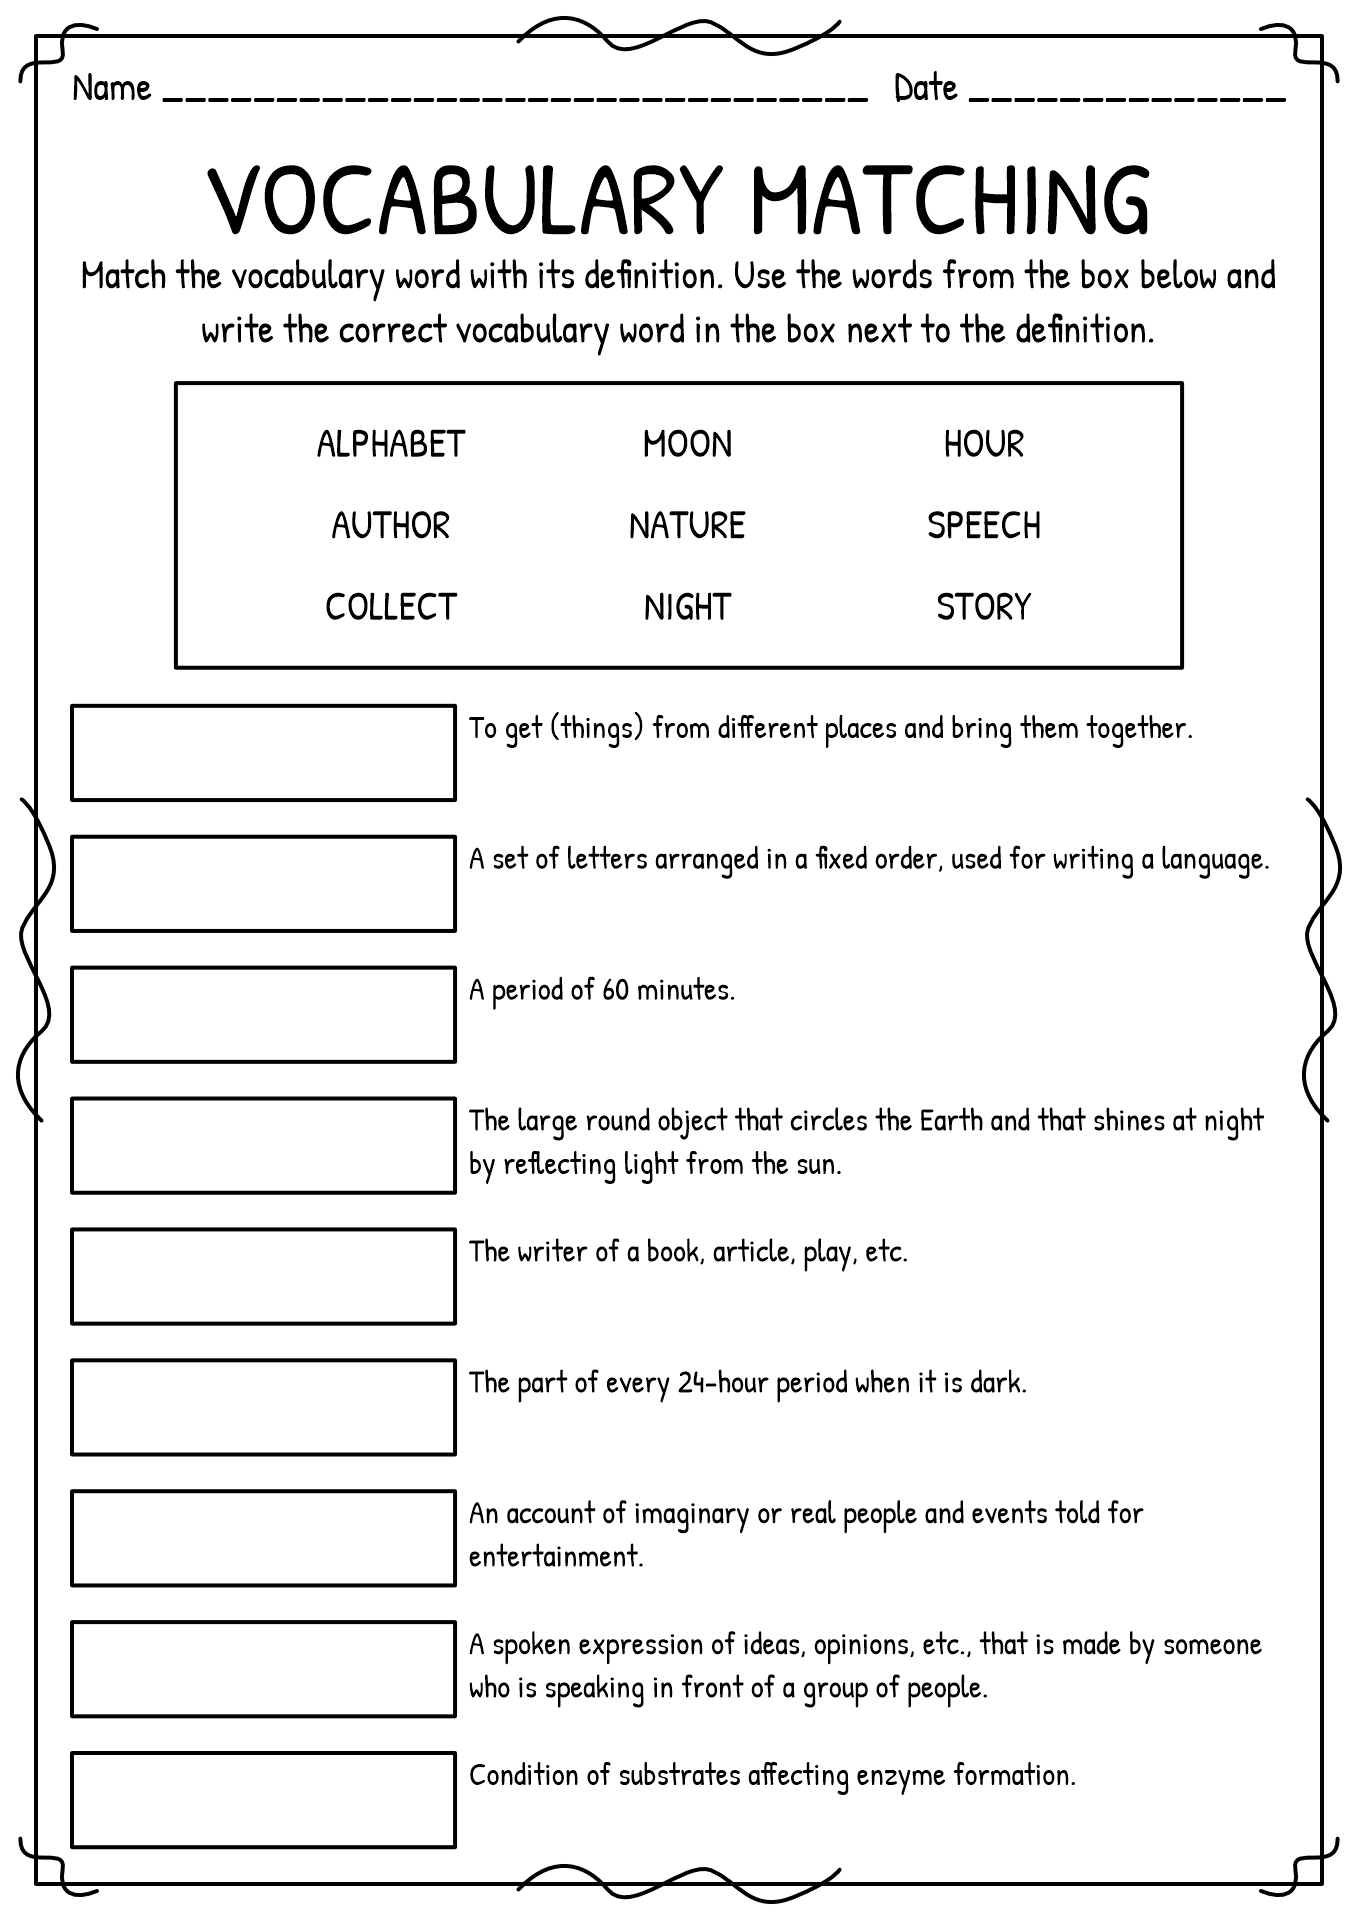 17-best-images-of-matching-worksheet-template-pdf-vocabulary-matching-worksheet-template